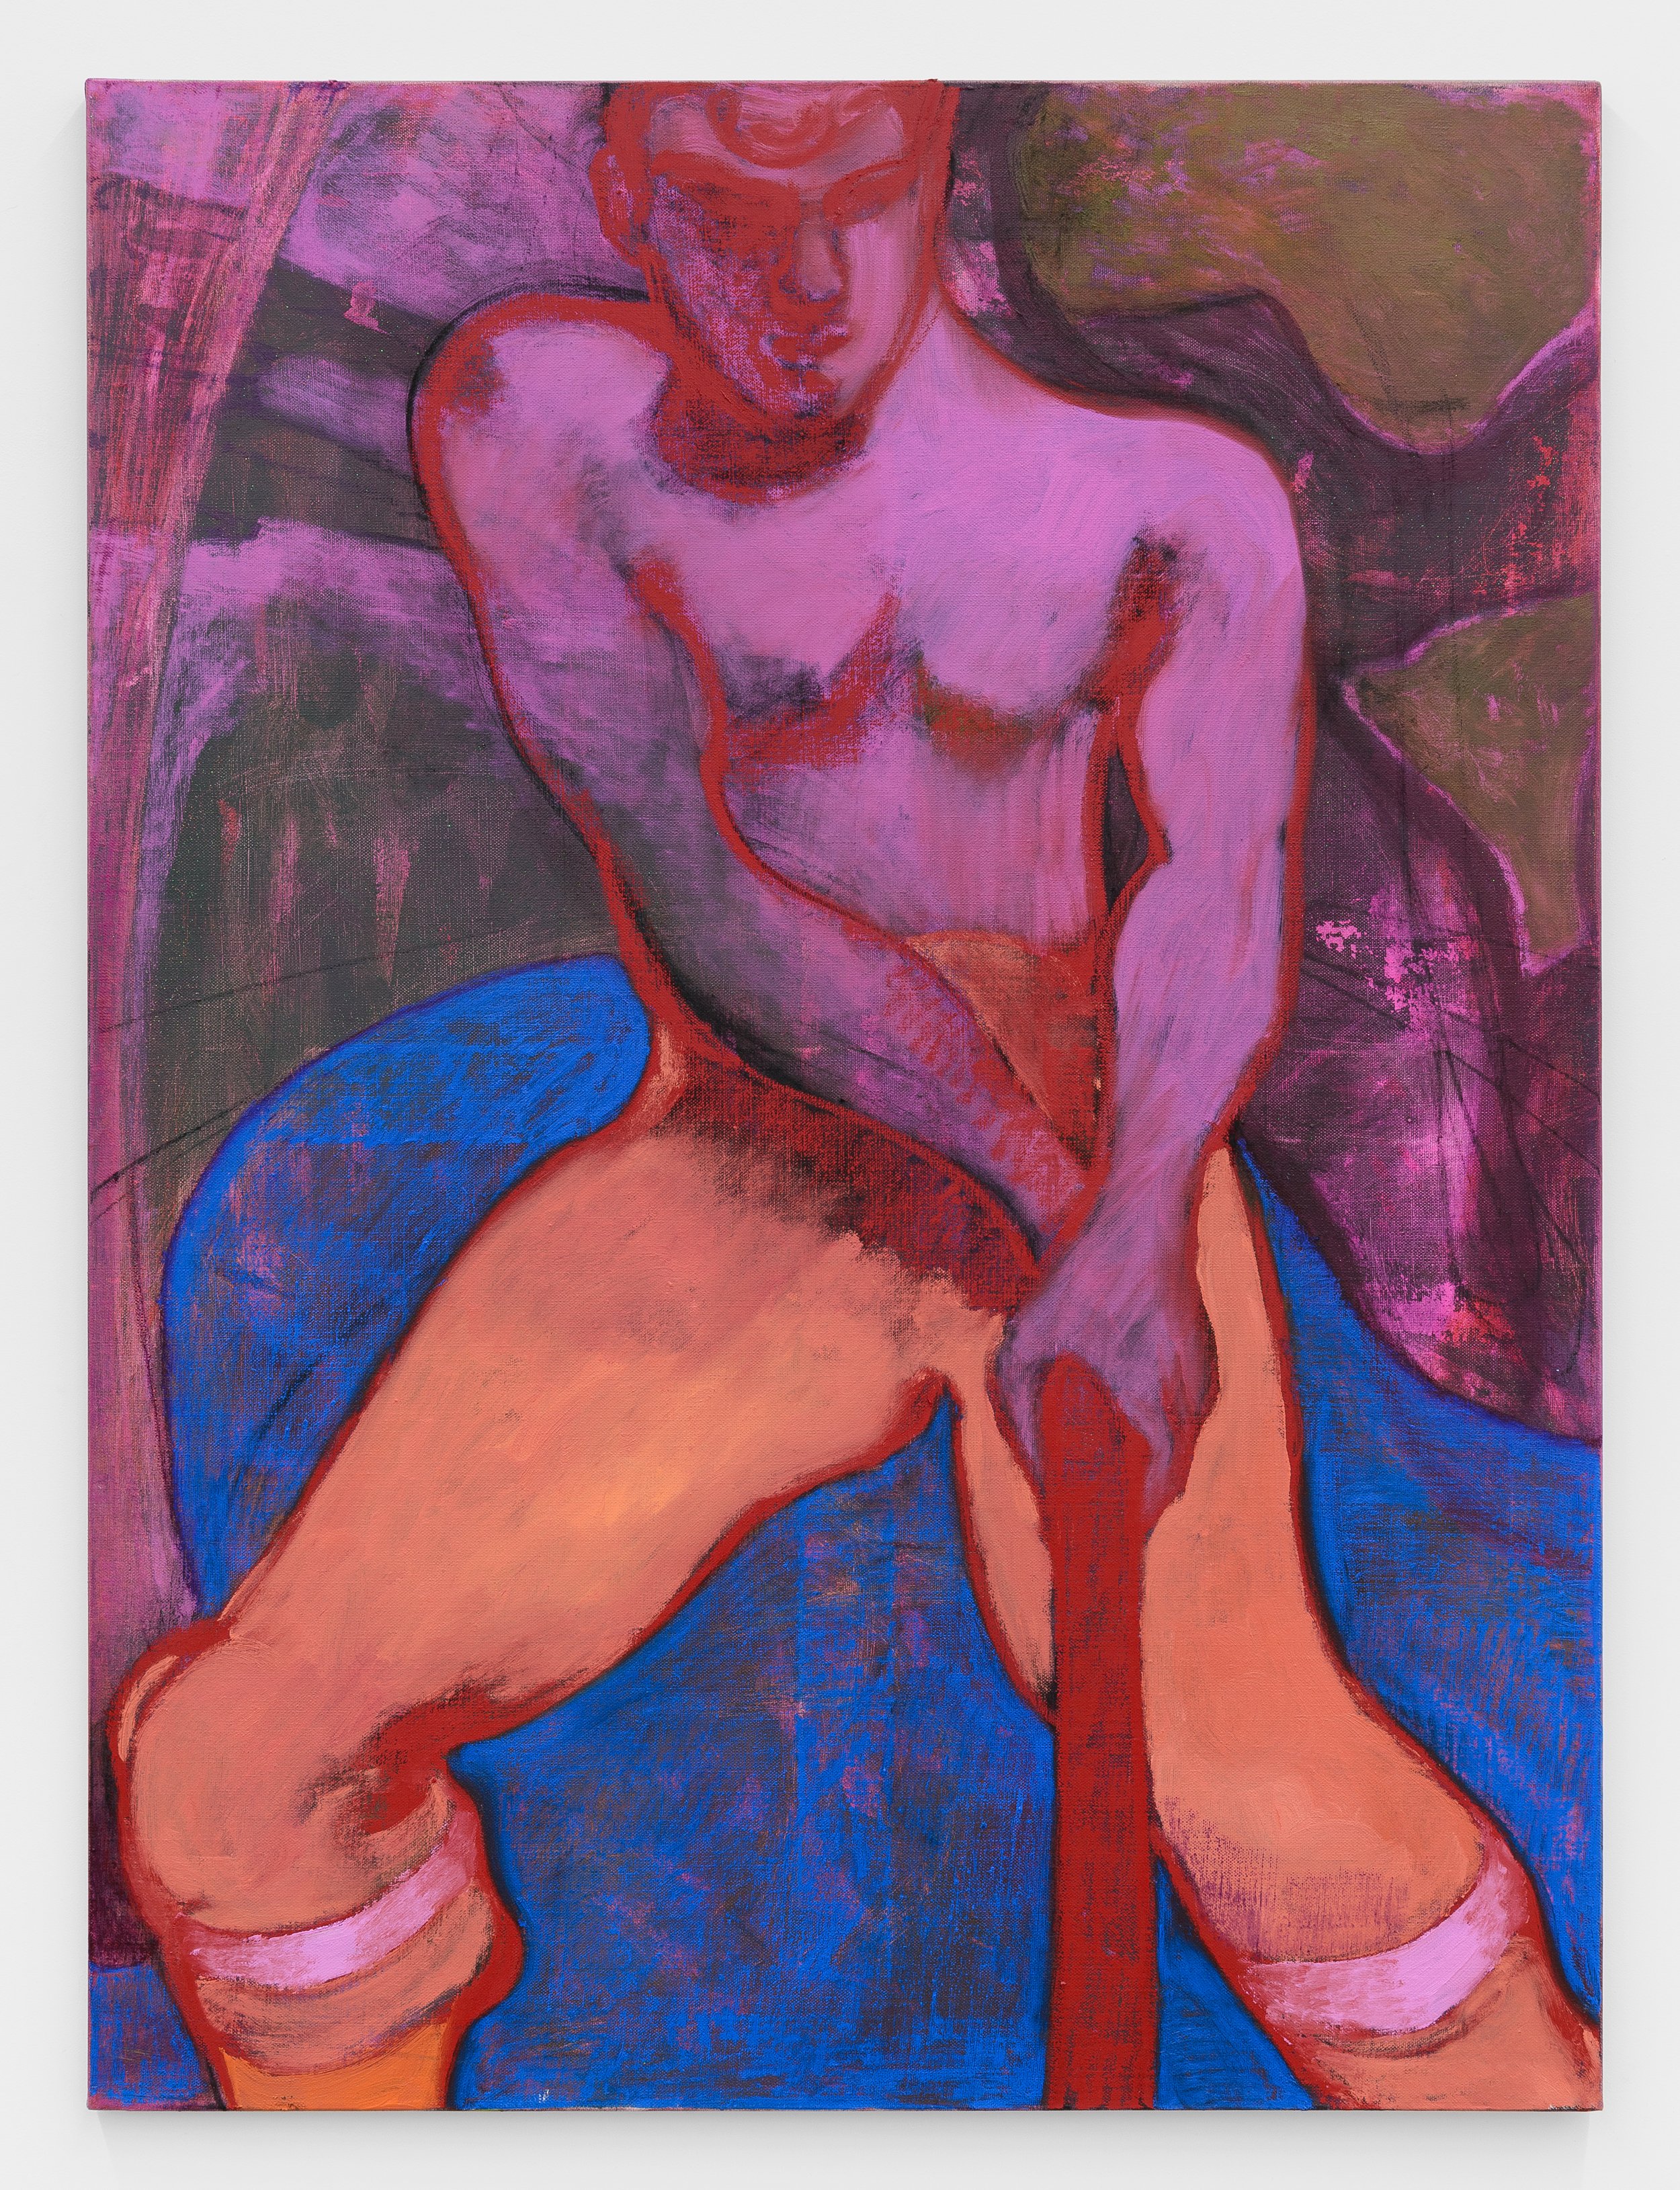  Cain, 2023                                                                         Huile sur toile, Oil on canvas                                            130 x 97 cm 51 1/8 x 38 1/4 inches                            Courtesy of the artist and Gal